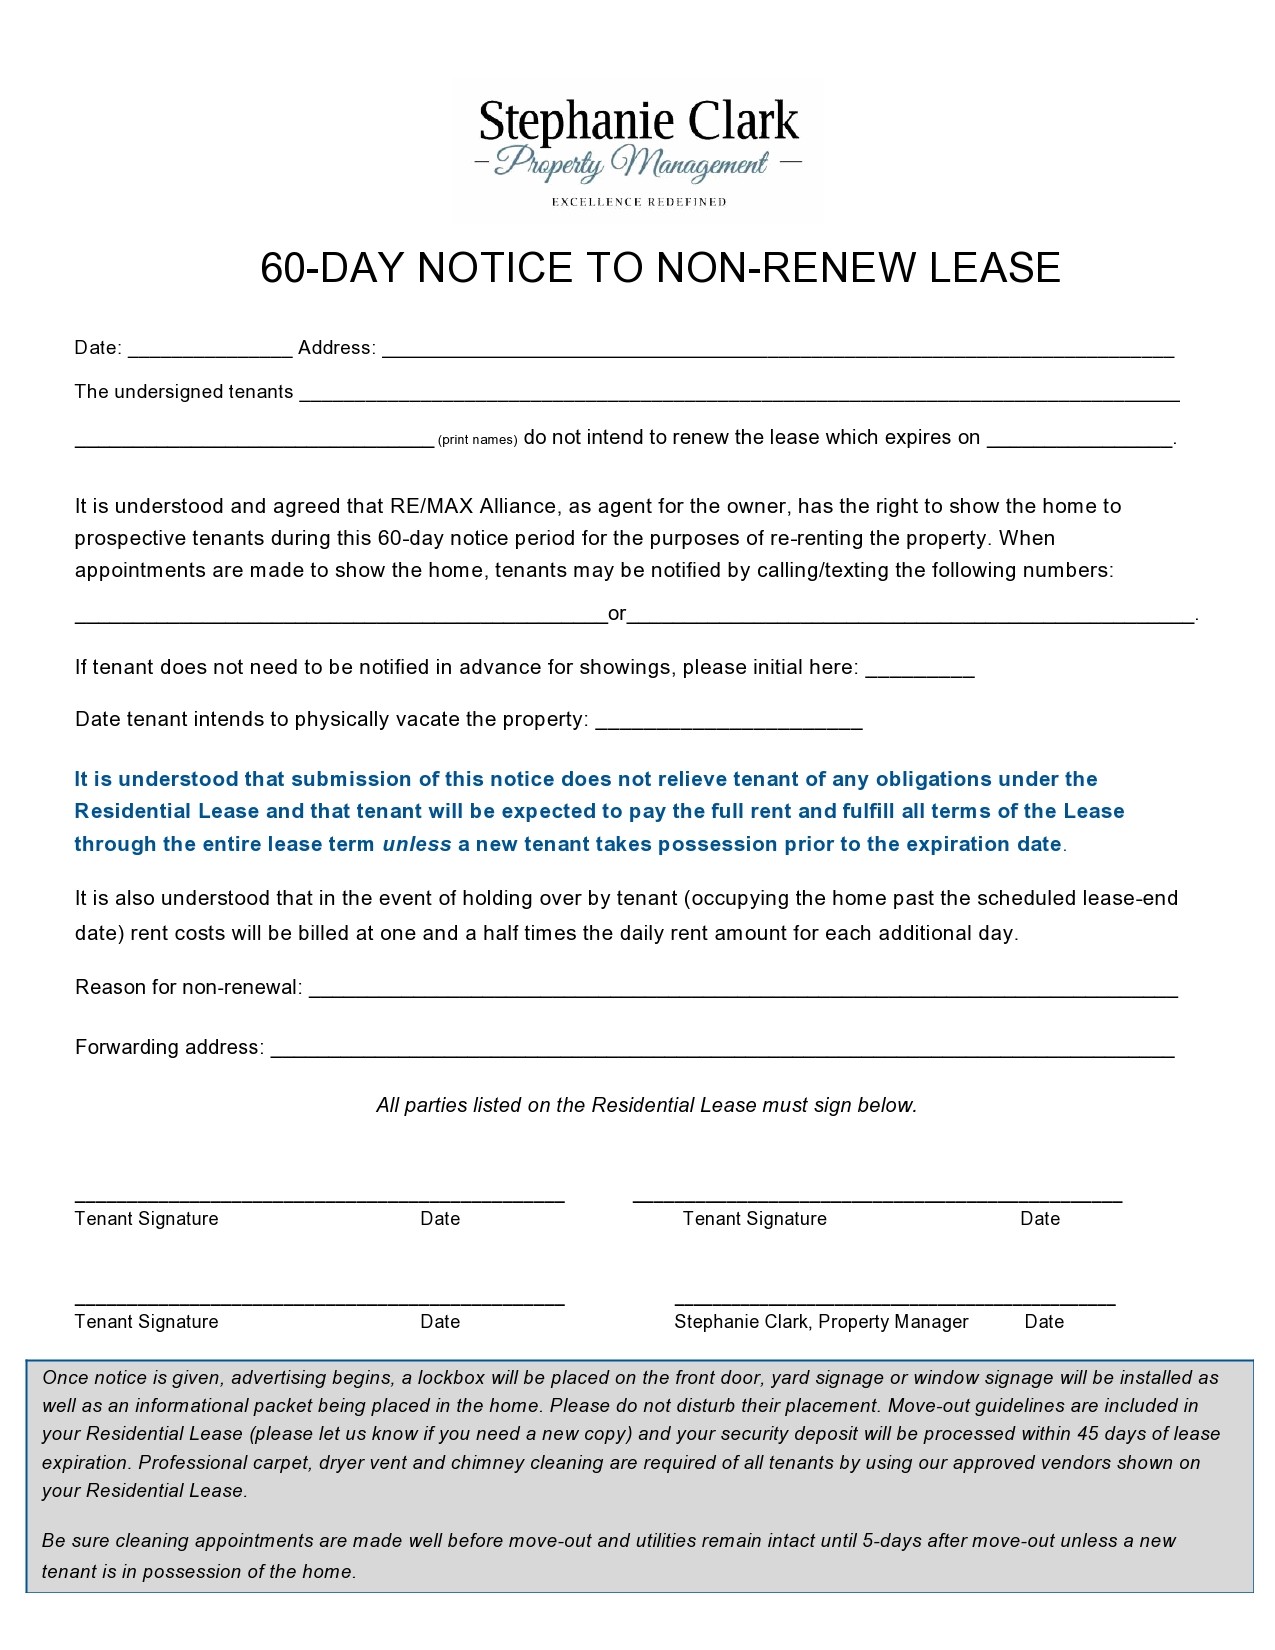 Free not renewing lease letter 25